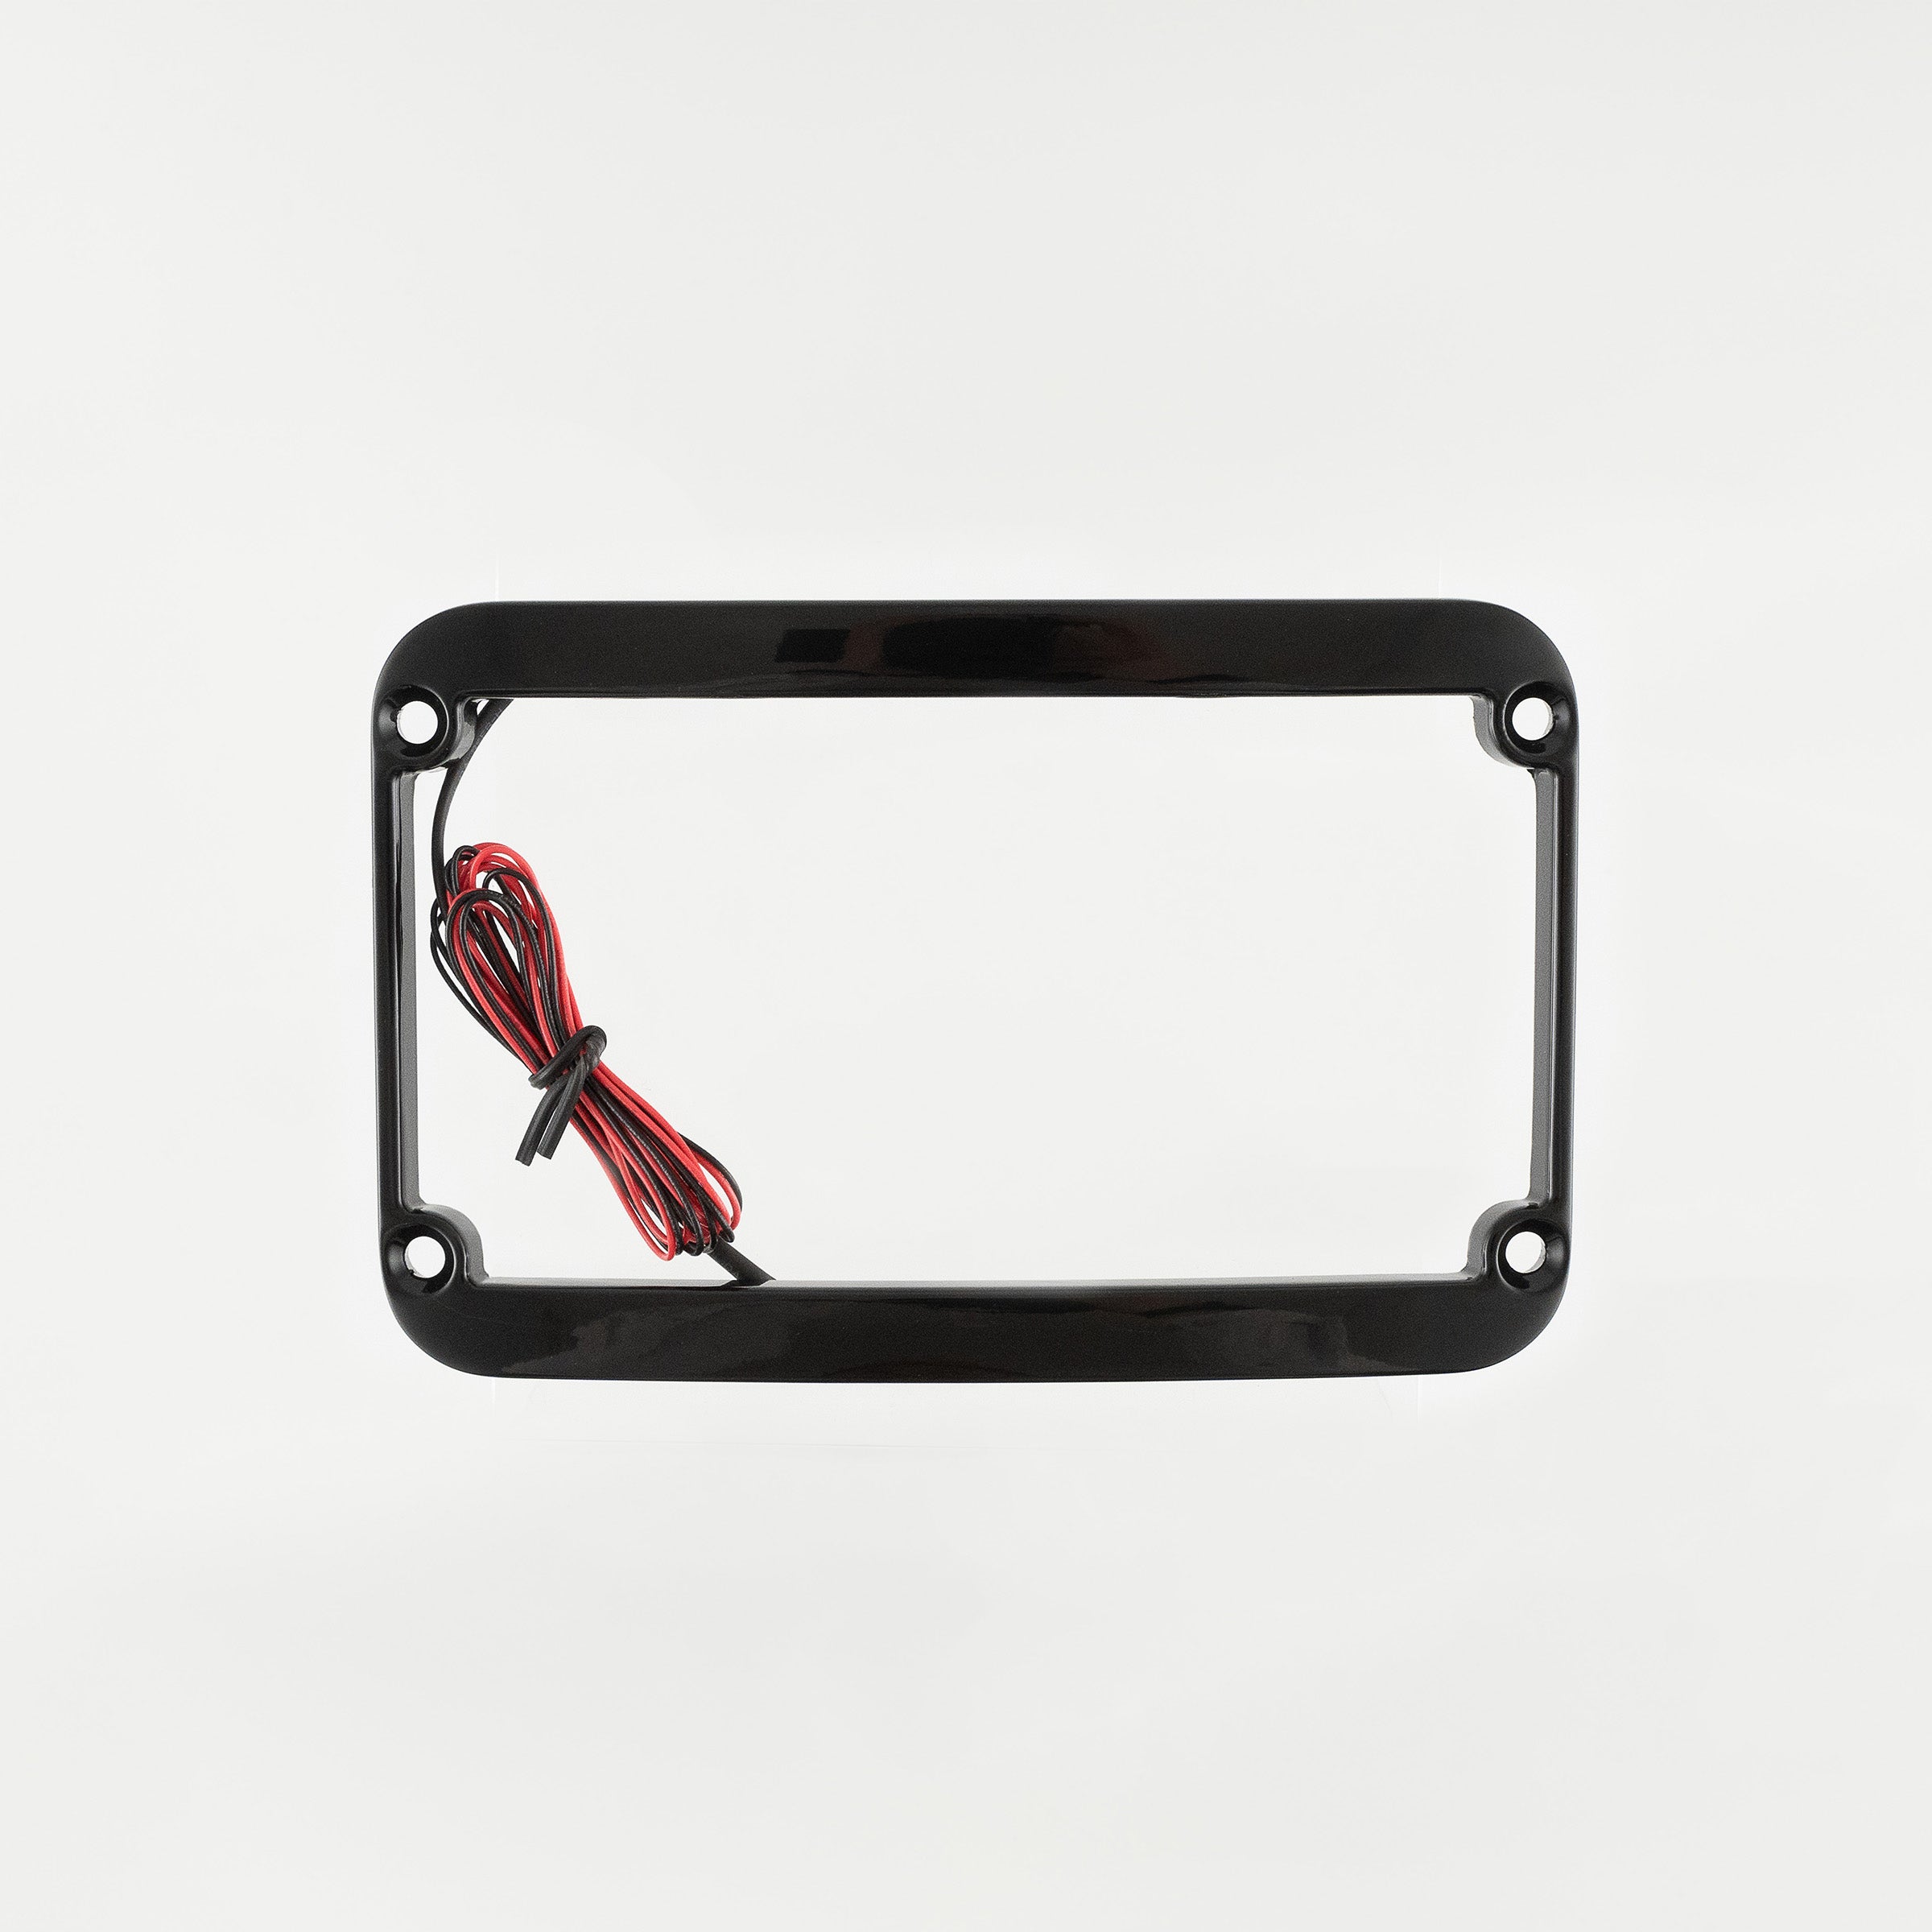 License Plate Frames for Motorcycles (The One Black)